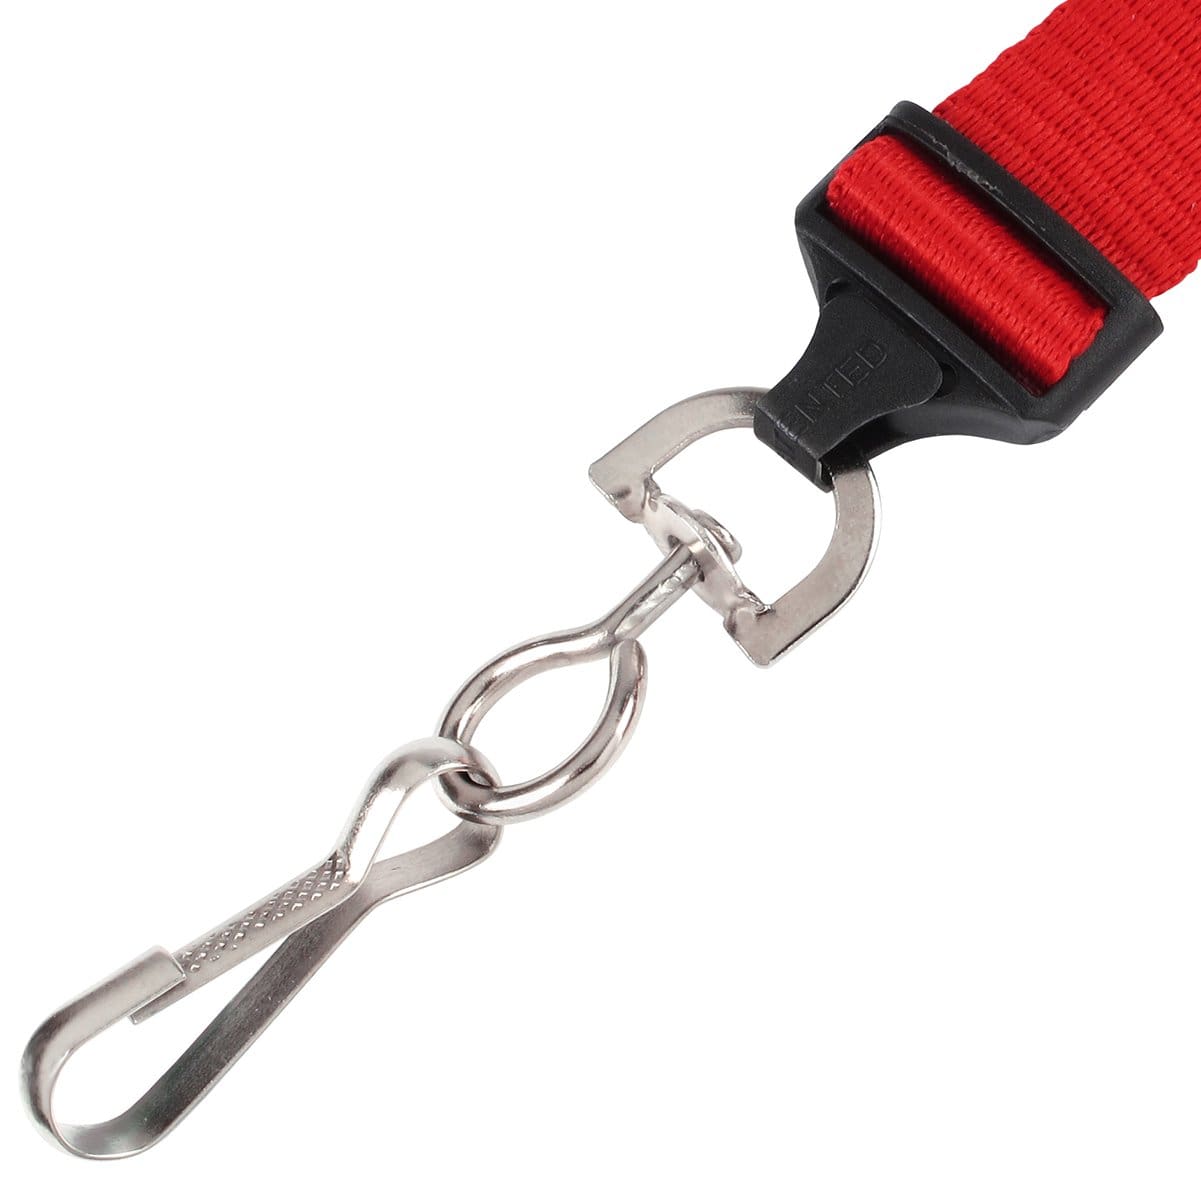 Premium Metal Swivel J Hook Clips with 1/2 Inch D Ring - Great for DIY Lanyards & Crafts (6920-2300) 6920-2300